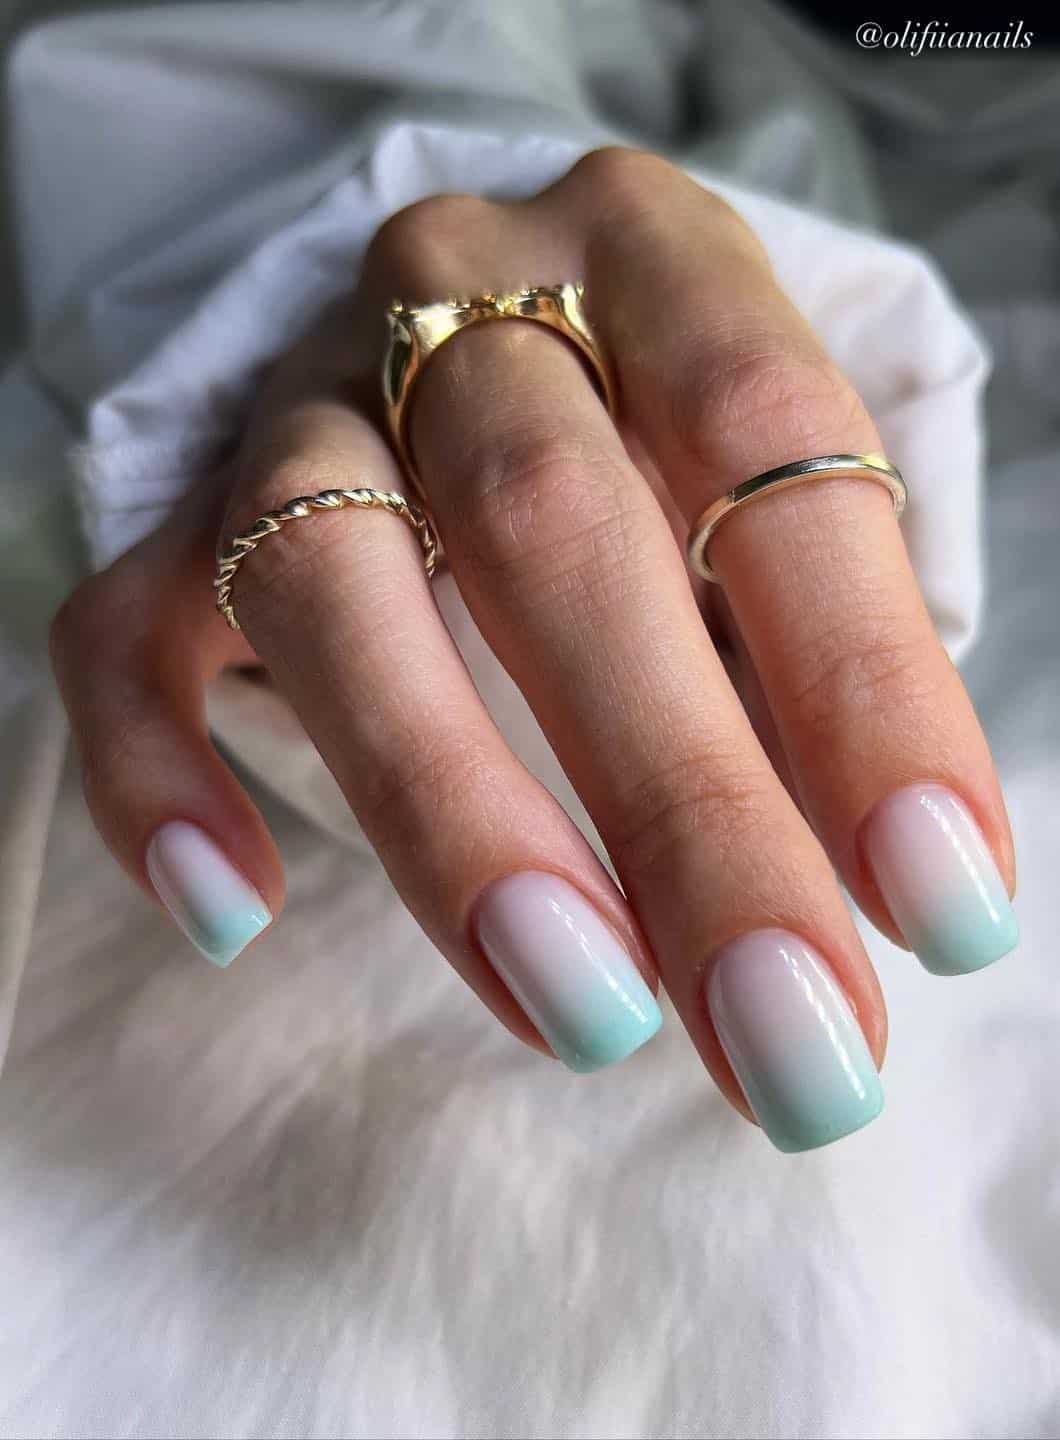 A hand with short square nails painted in a white and mint green ombre